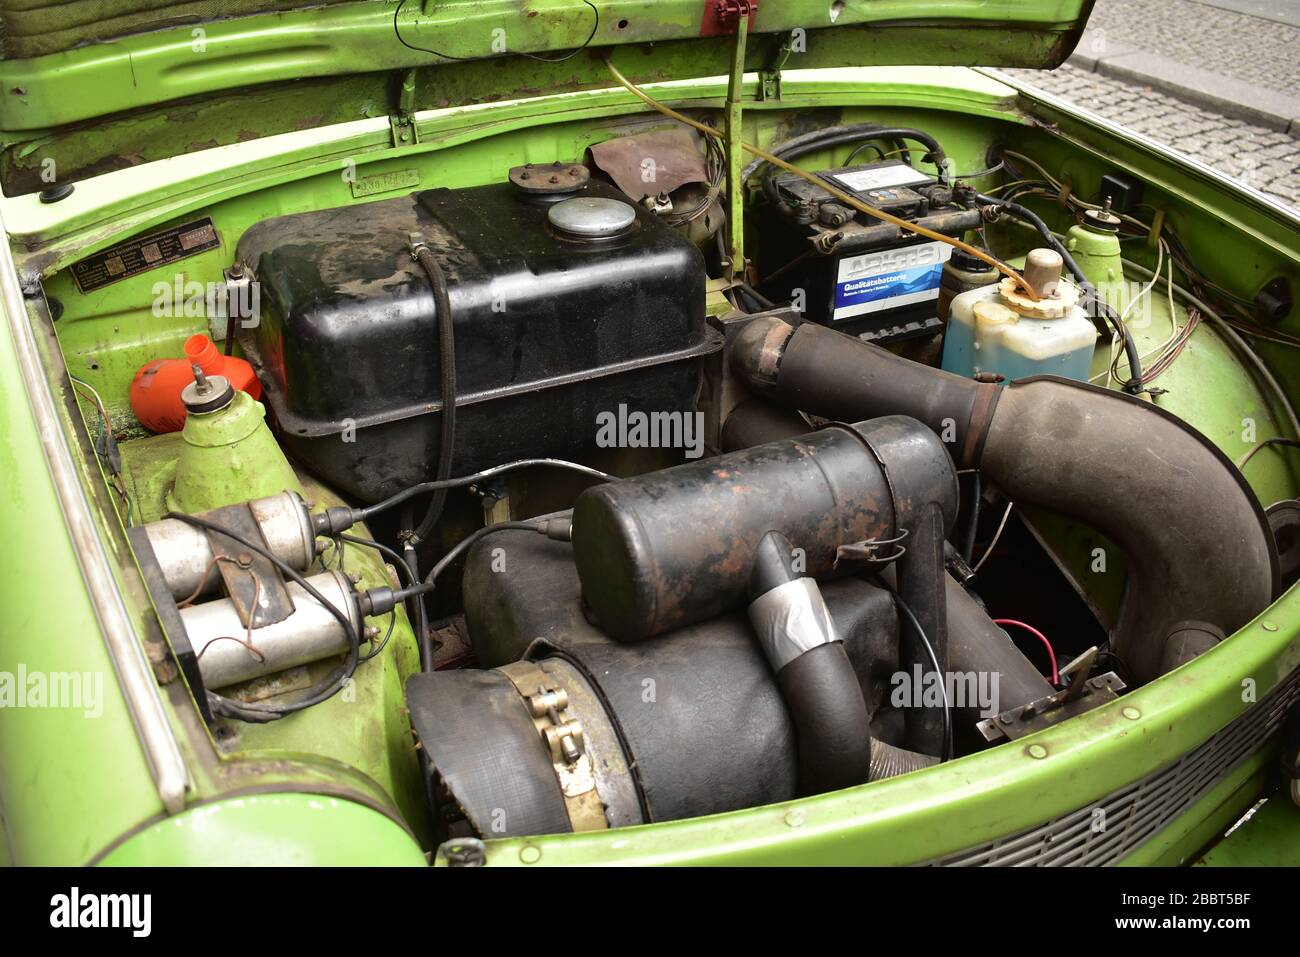 Engine of a Green Trabant 601 Vintage car Berlin Stock Photo - Alamy